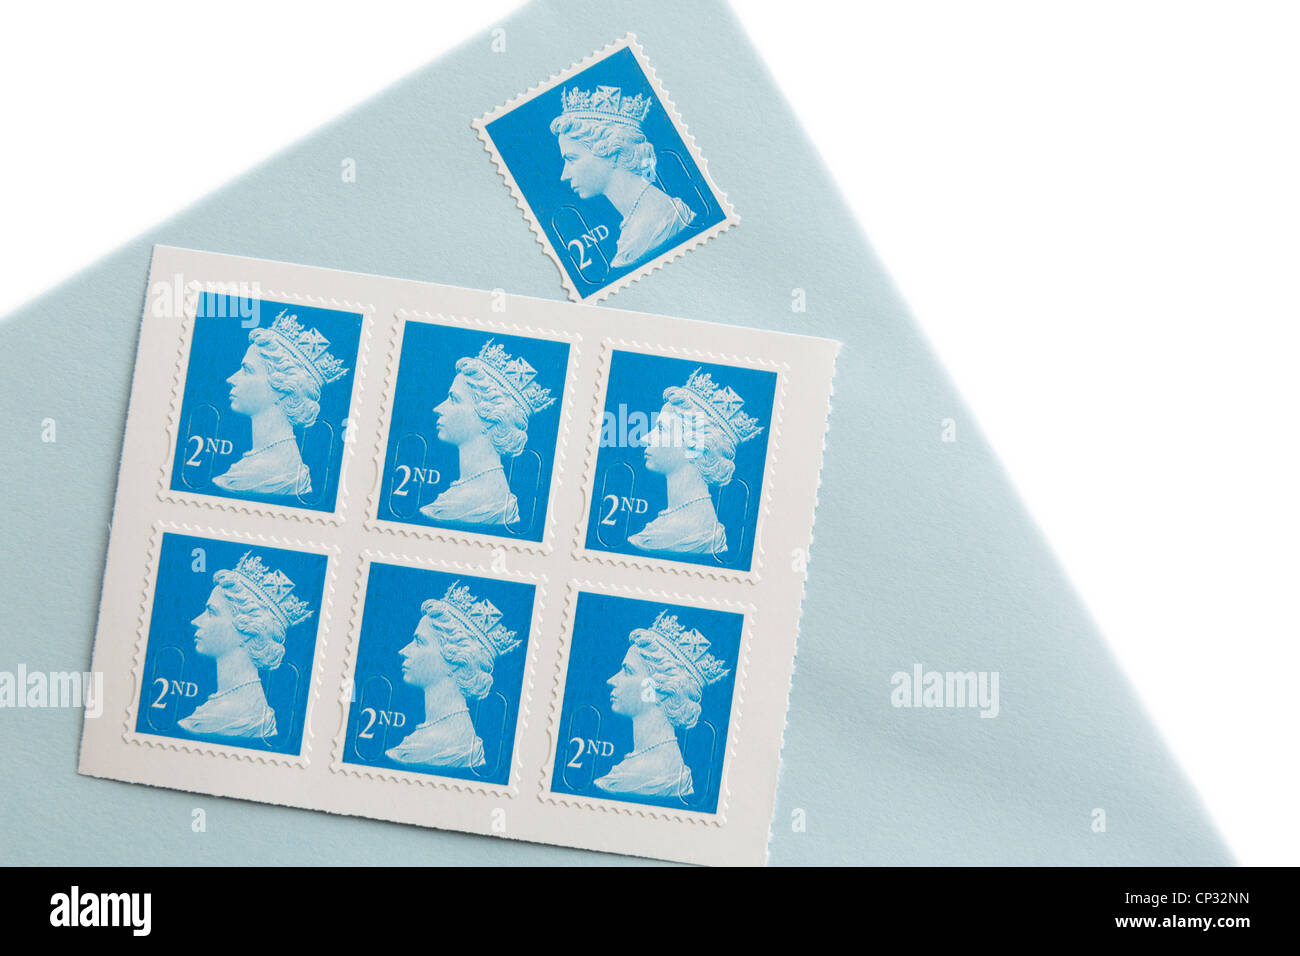 Royal Mail second class postage stamps and an envelope with a stamp isolated on a white. England, UK, Britain. Stock Photo